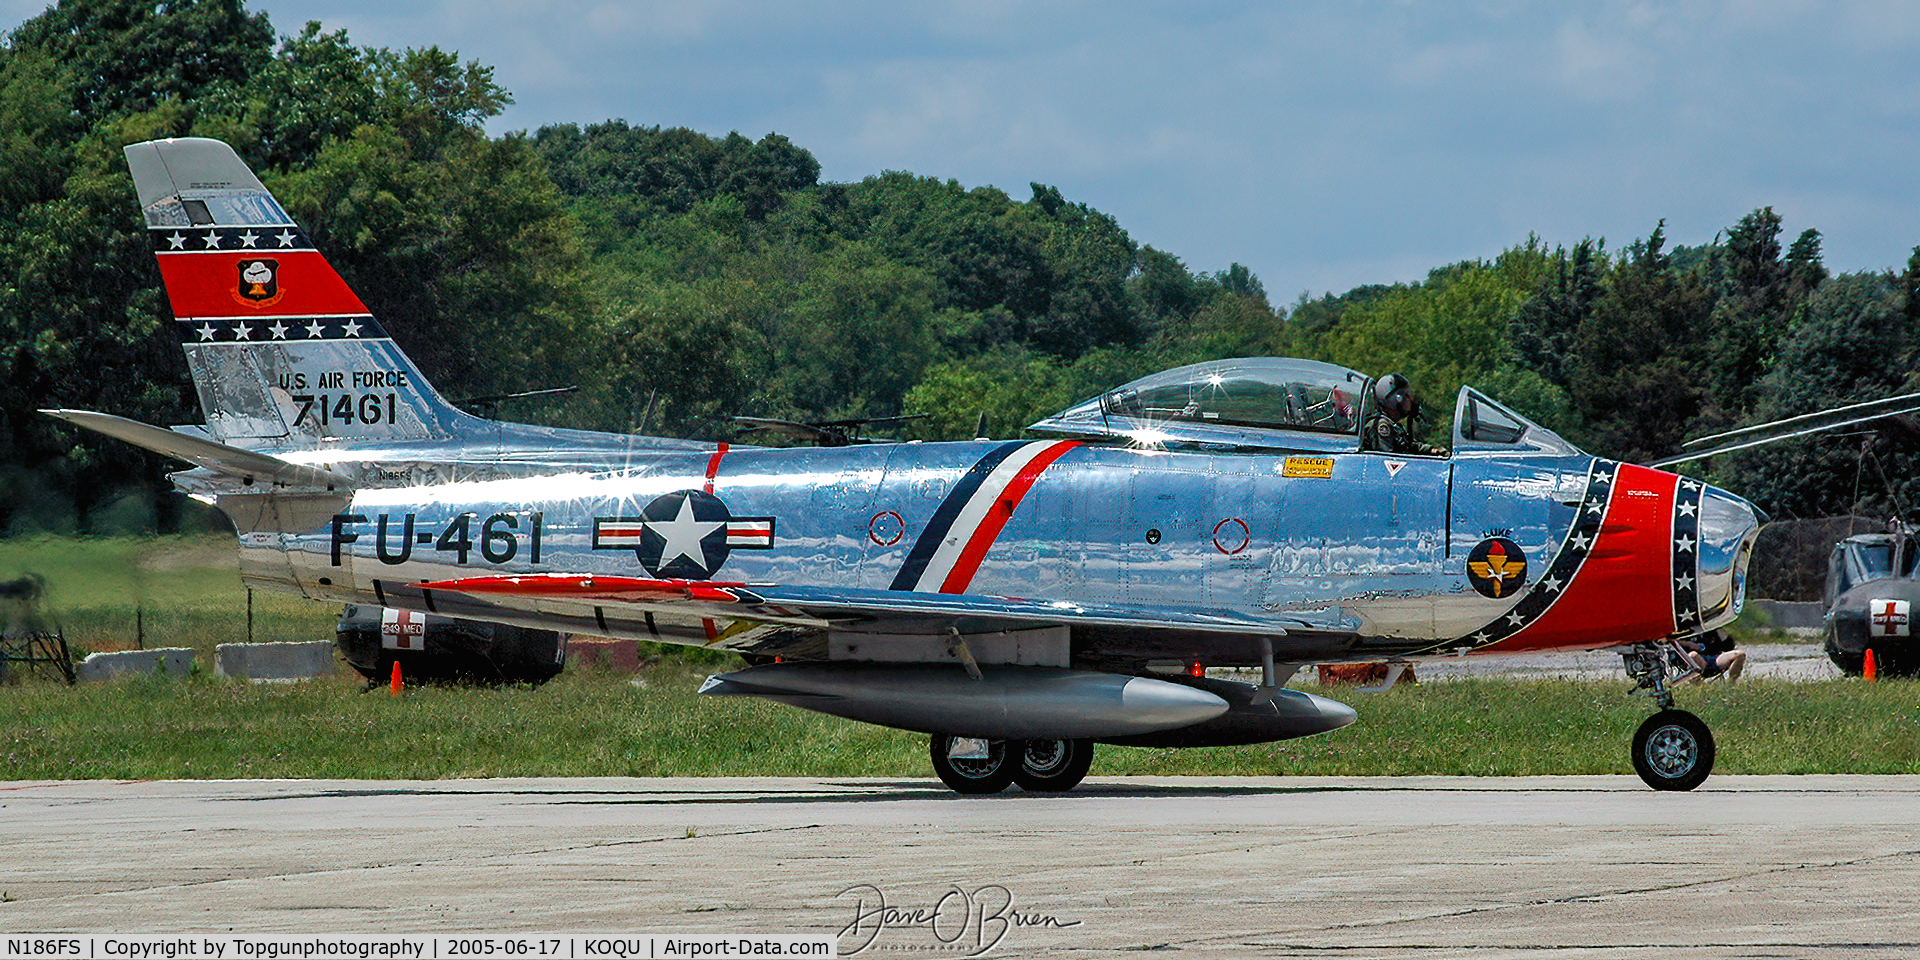 N186FS, 1956 Canadair CL-13B Sabre 6 C/N 1461, Ed Shipley holding short to practice for Heritage Flight